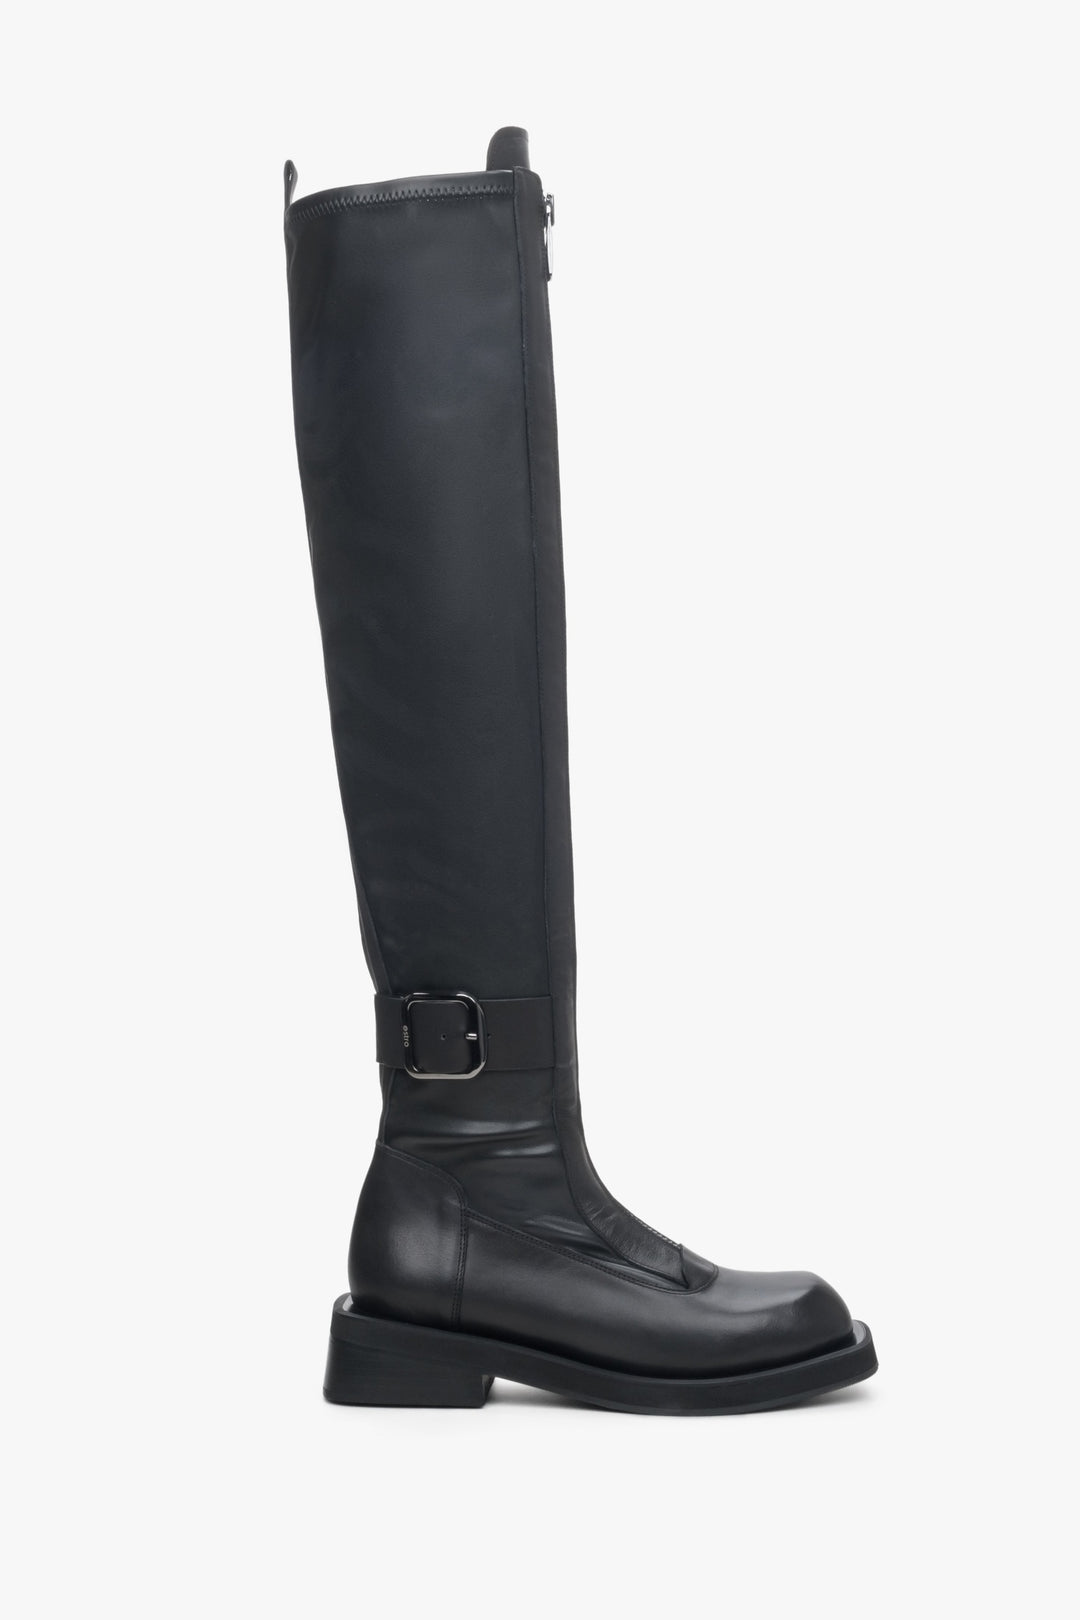 Women's Black High Boots with Elastic Shaft and Decorative Buckle Estro ER00113890.